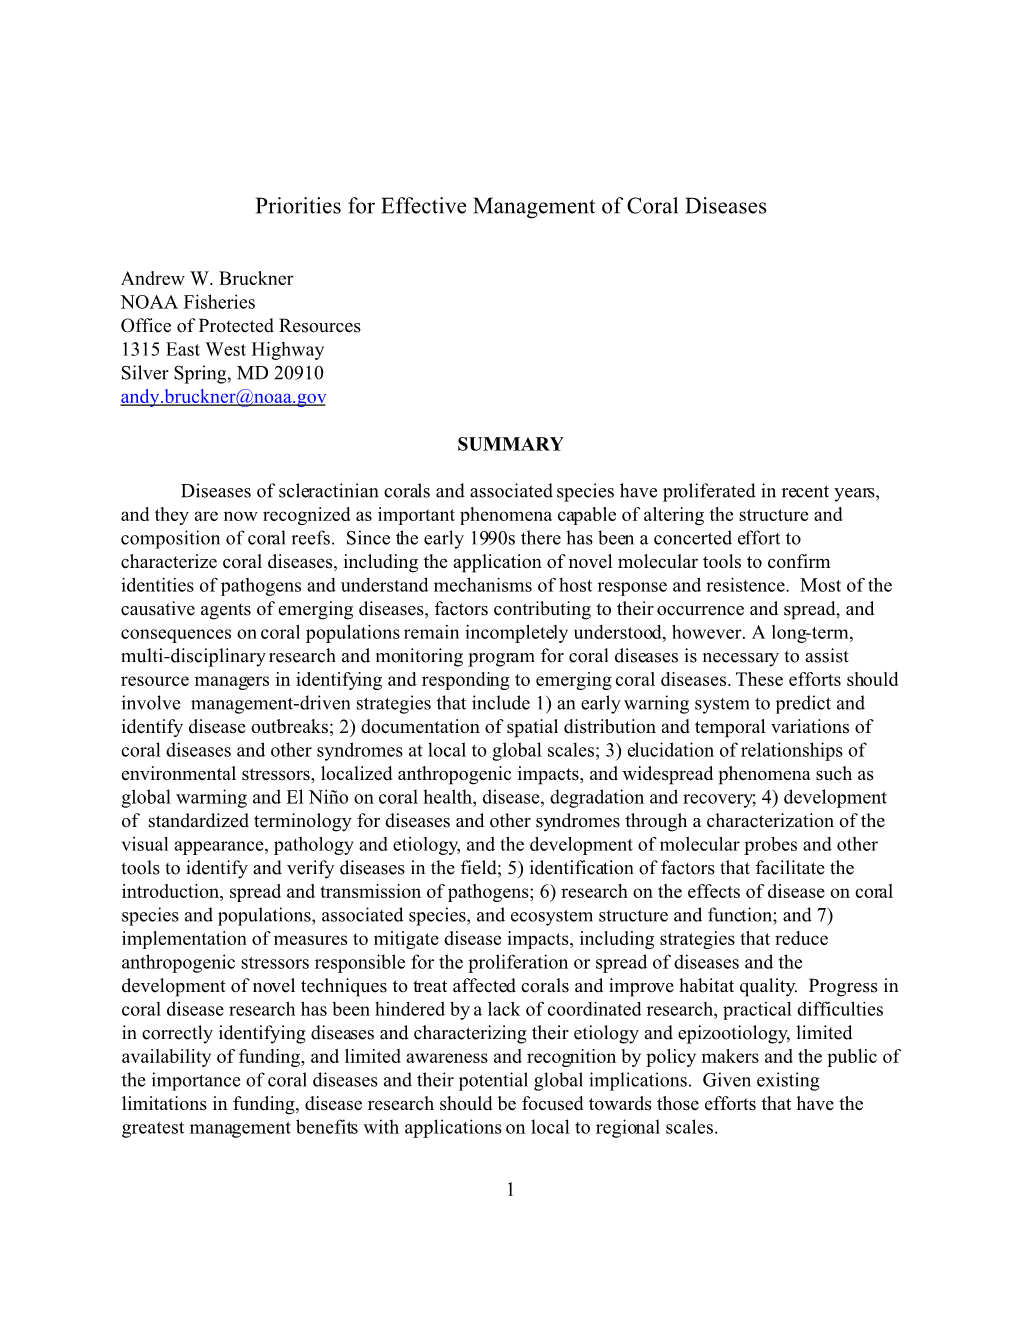 Priorities for Effective Management of Coral Diseases